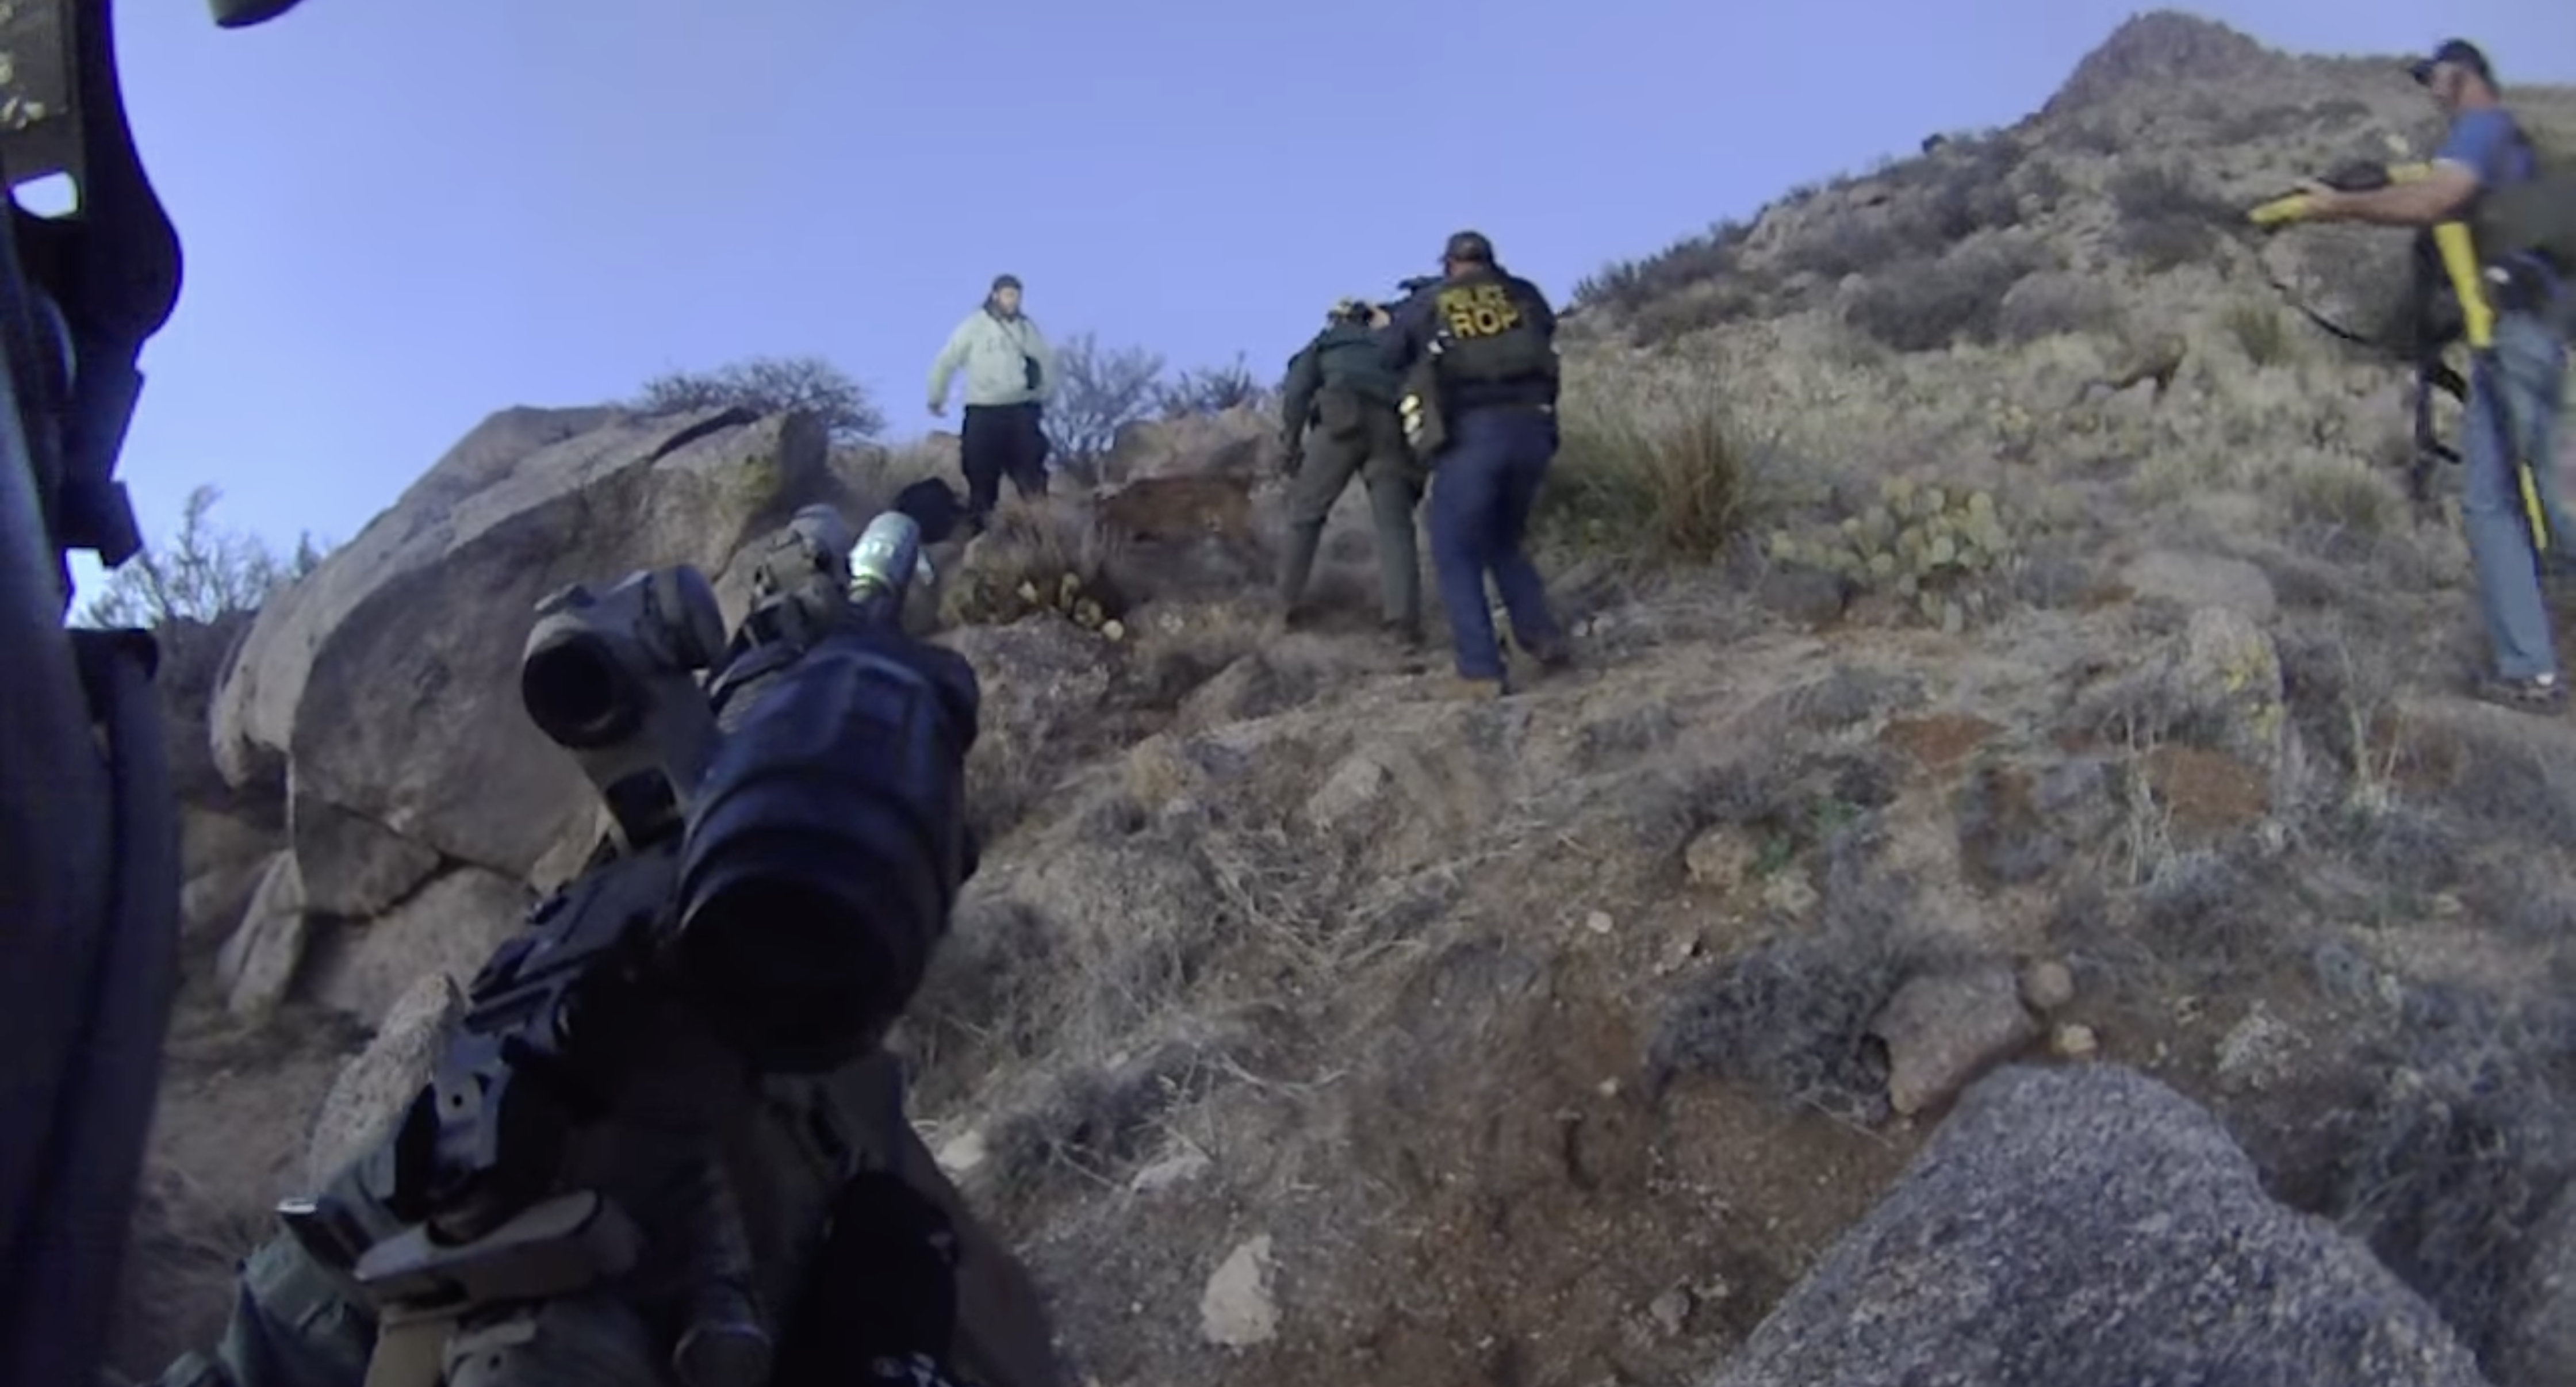 Body cam footage of Albuquerque police shooting of James Boyd, 38, a white homeless man in the Sandia foothills, March 16, 2014.